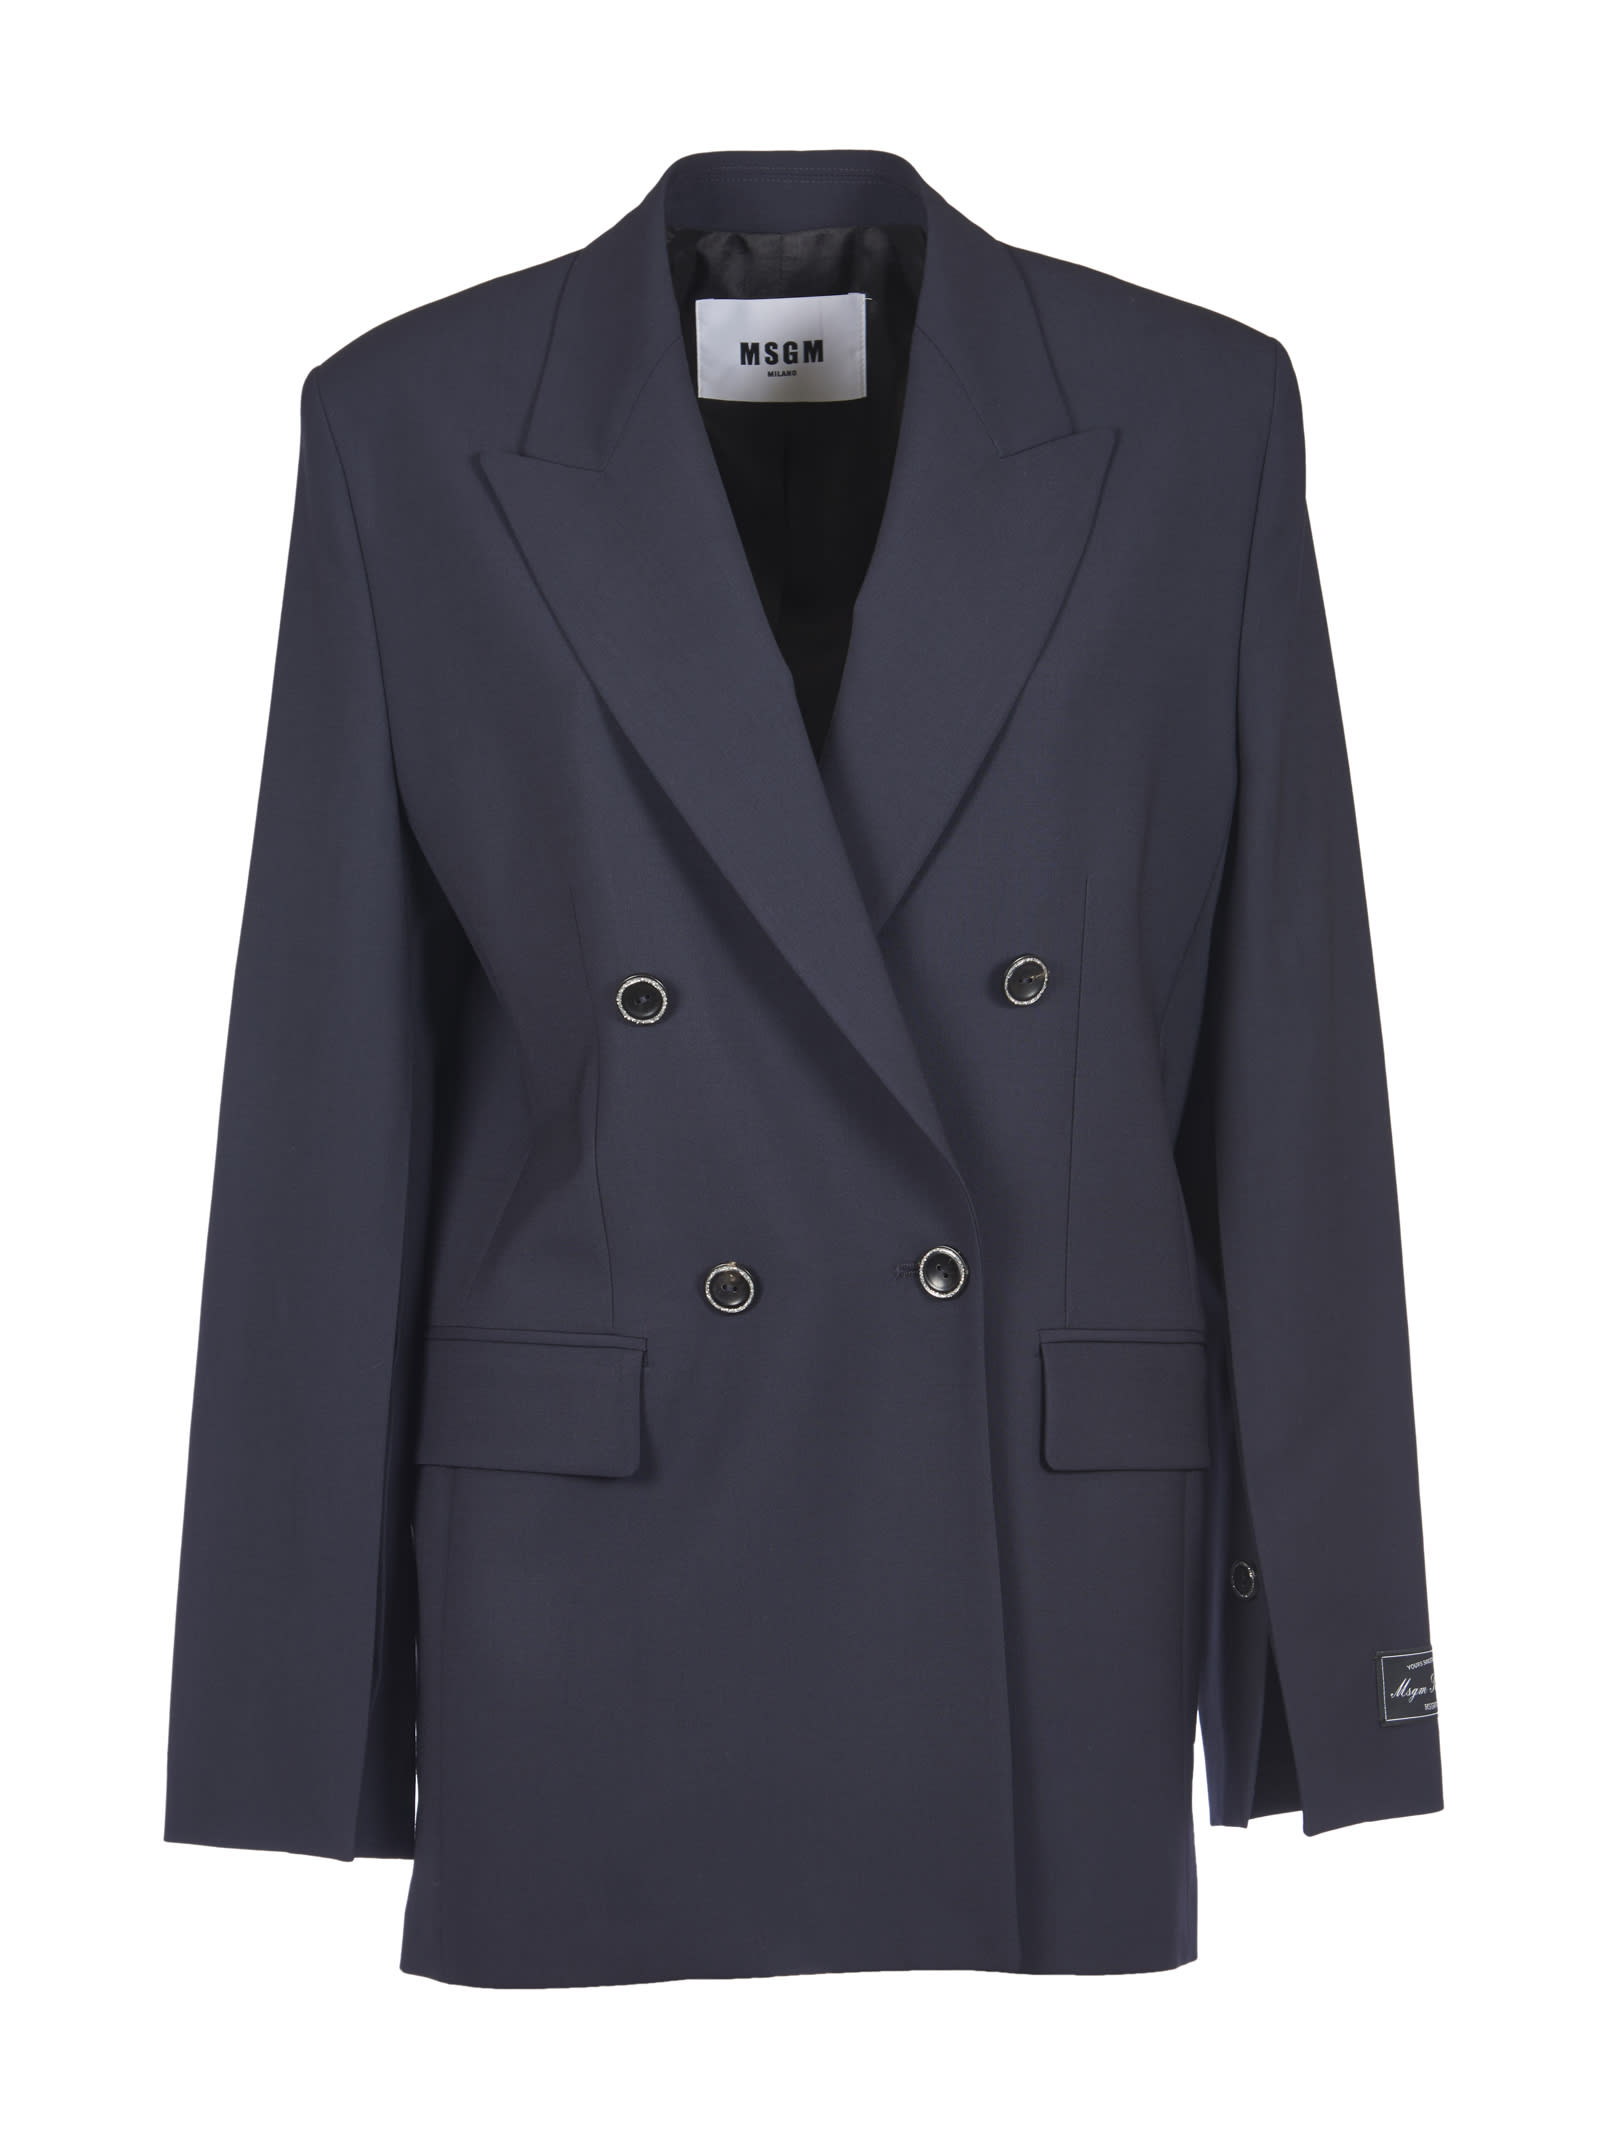 MSGM DOUBLE-BREASTED BLAZER BY MSGM